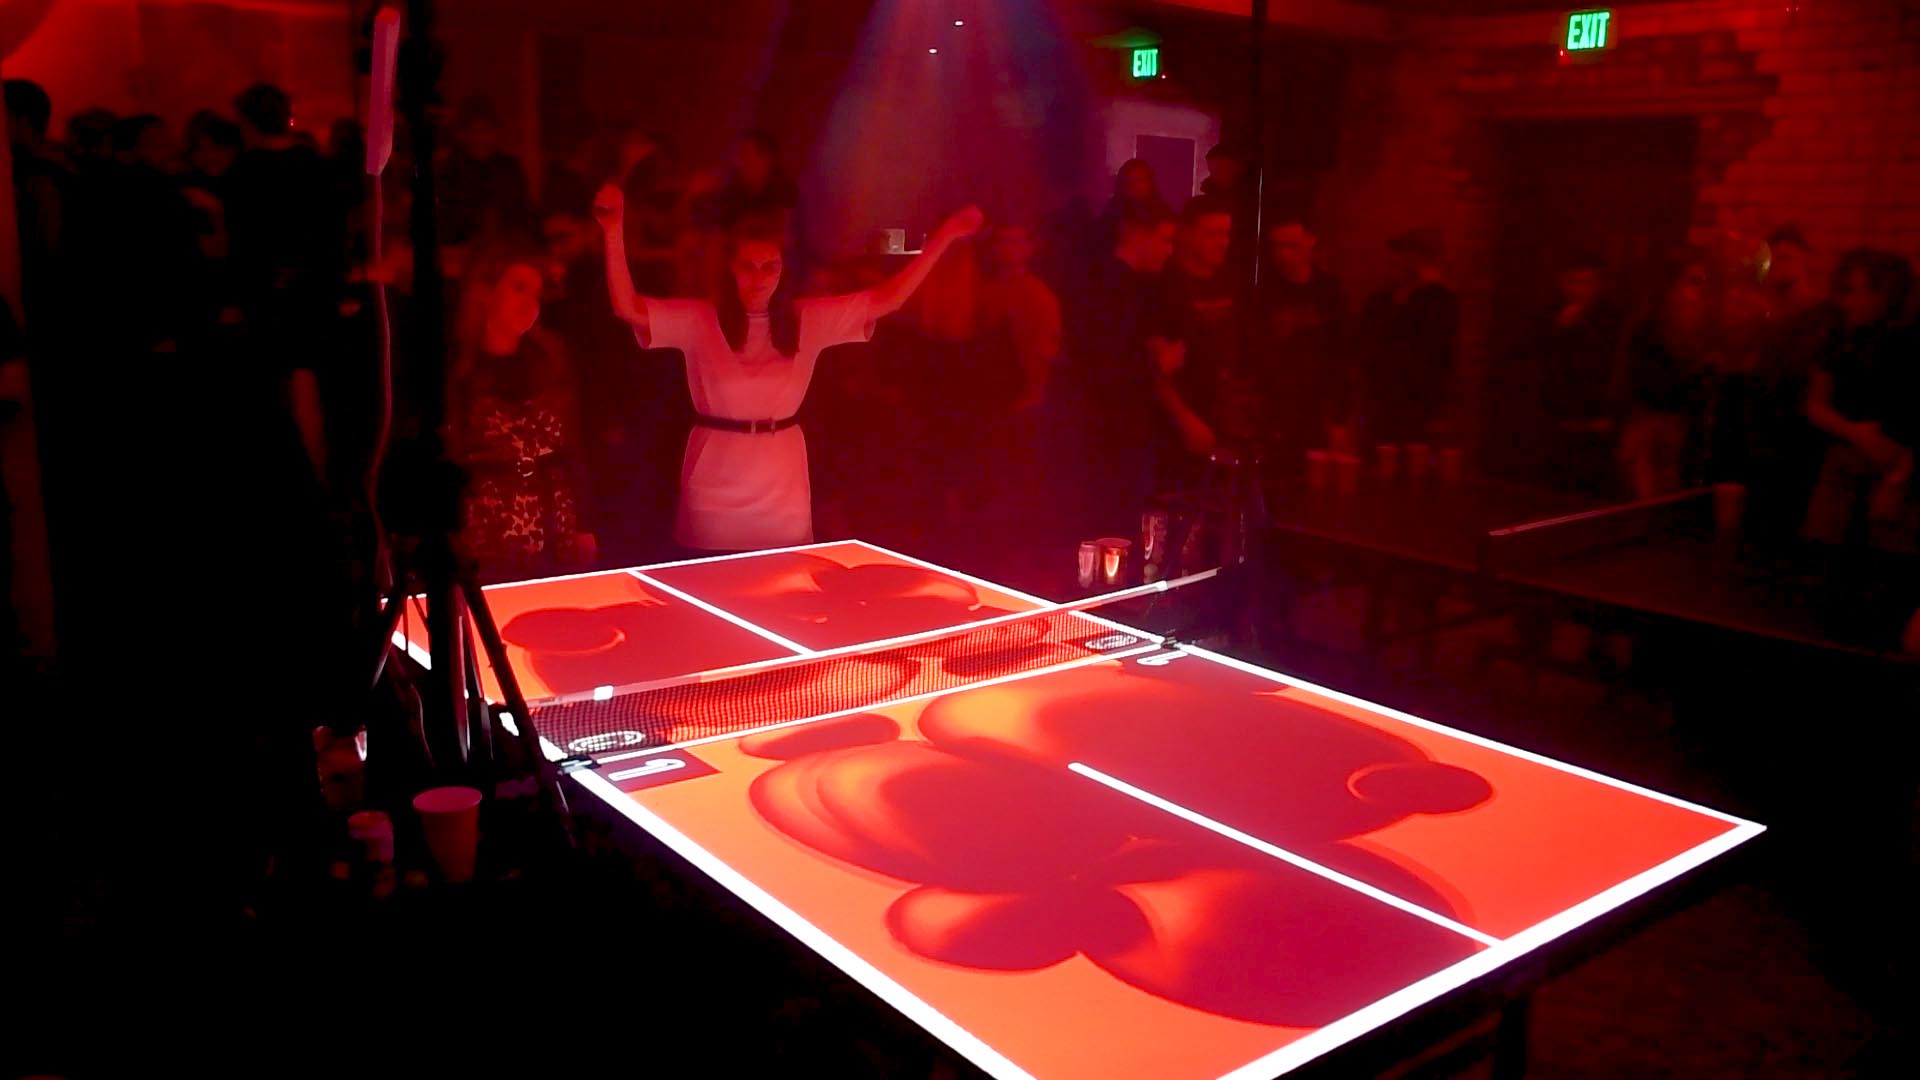 Asahi Interactive Ping Pong Table, with players and projection mapping